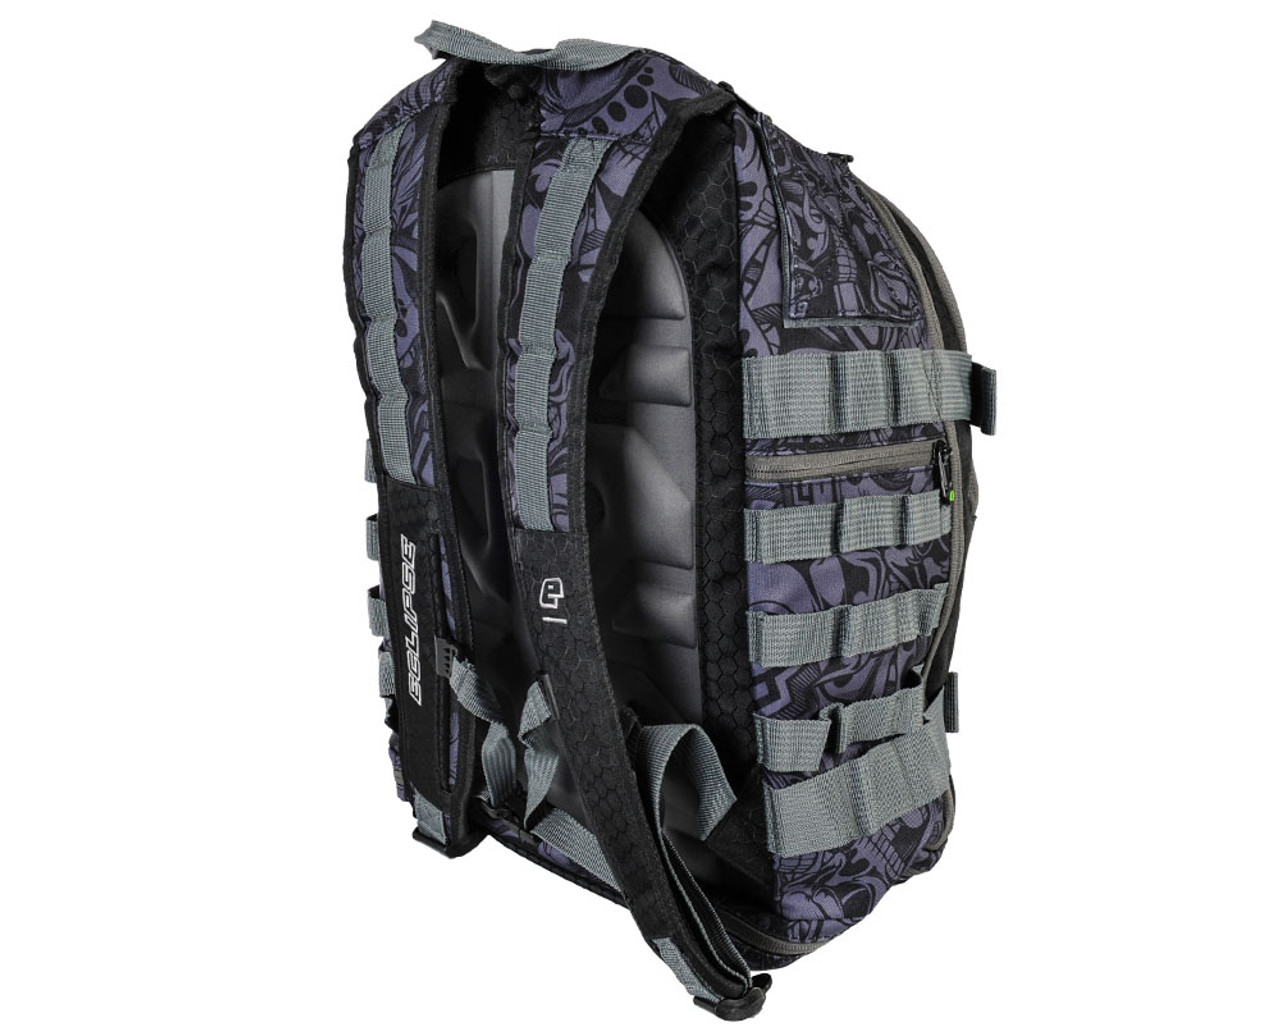 Planet Eclipse GX Gravel Backpack - Charcoal (ZYX-0168)